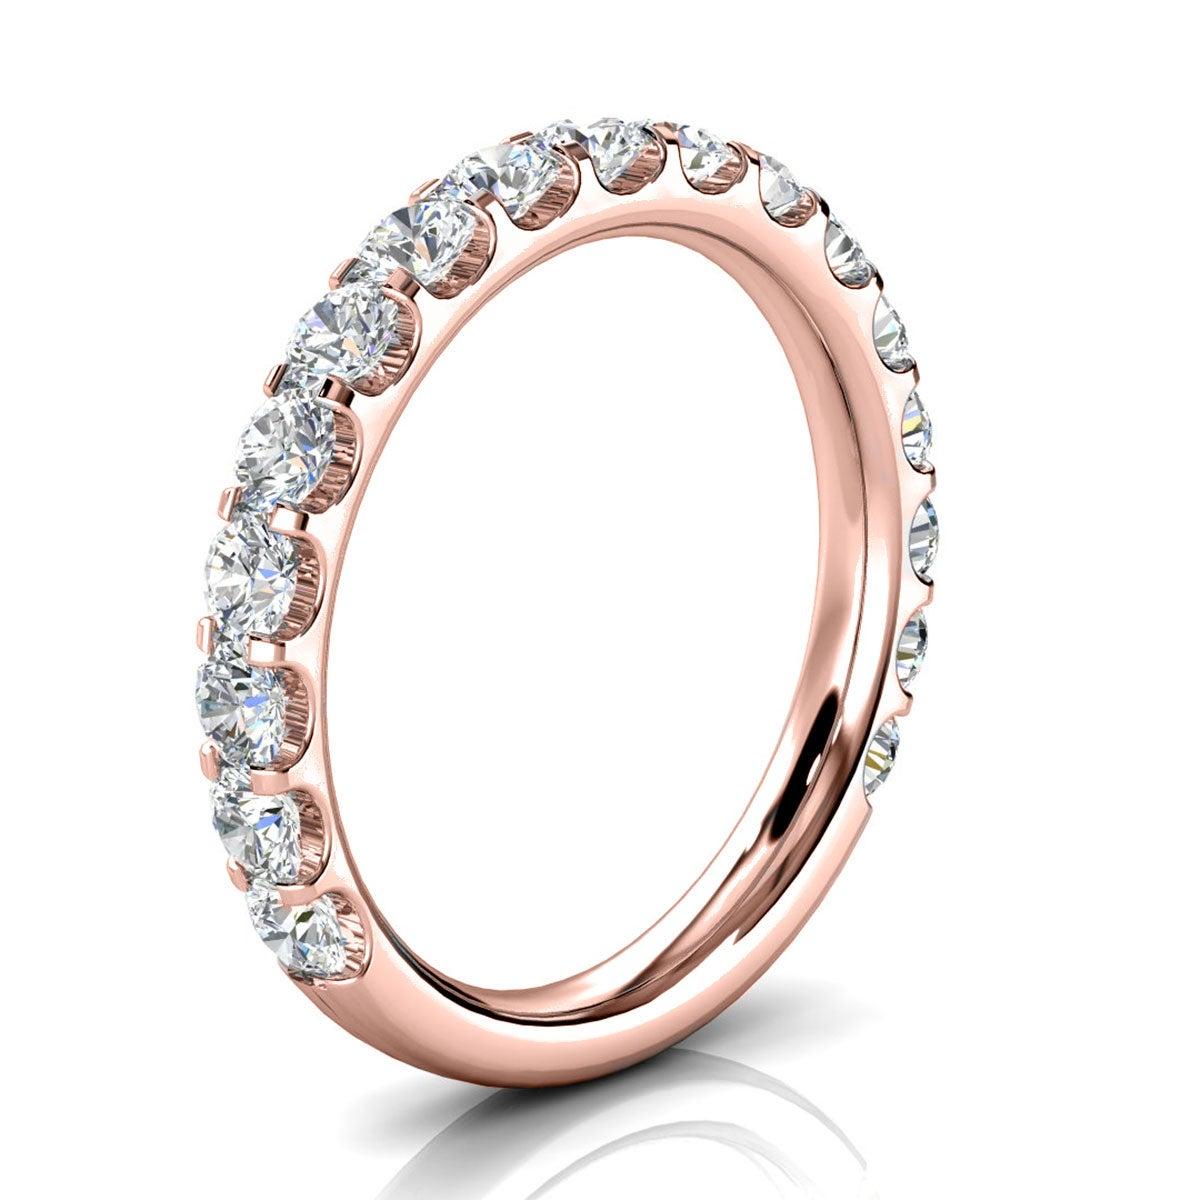 For Sale:  14k Rose Gold Carole Micro-Prong Diamond Ring '1 Ct. tw' 2